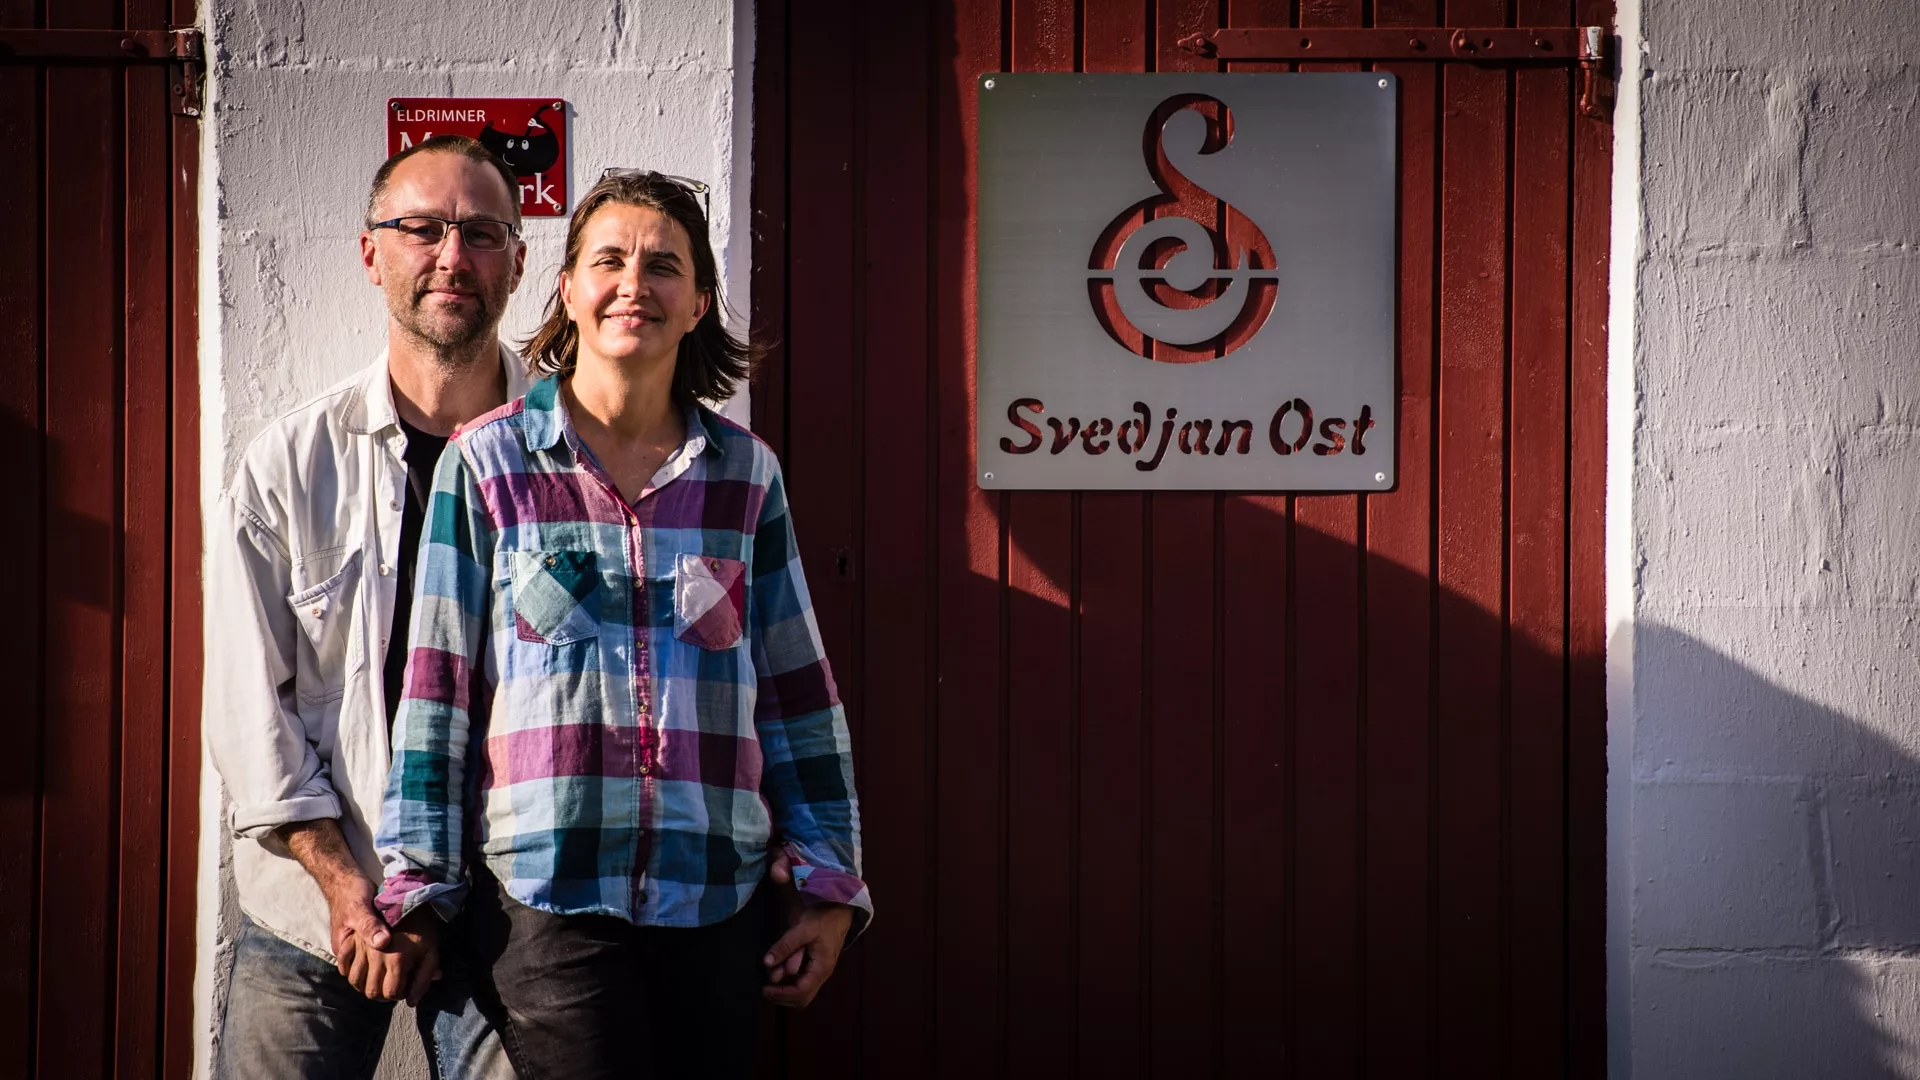 Svedjan Ost in Sweden, Europe | Cheesemakers - Rated 0.9